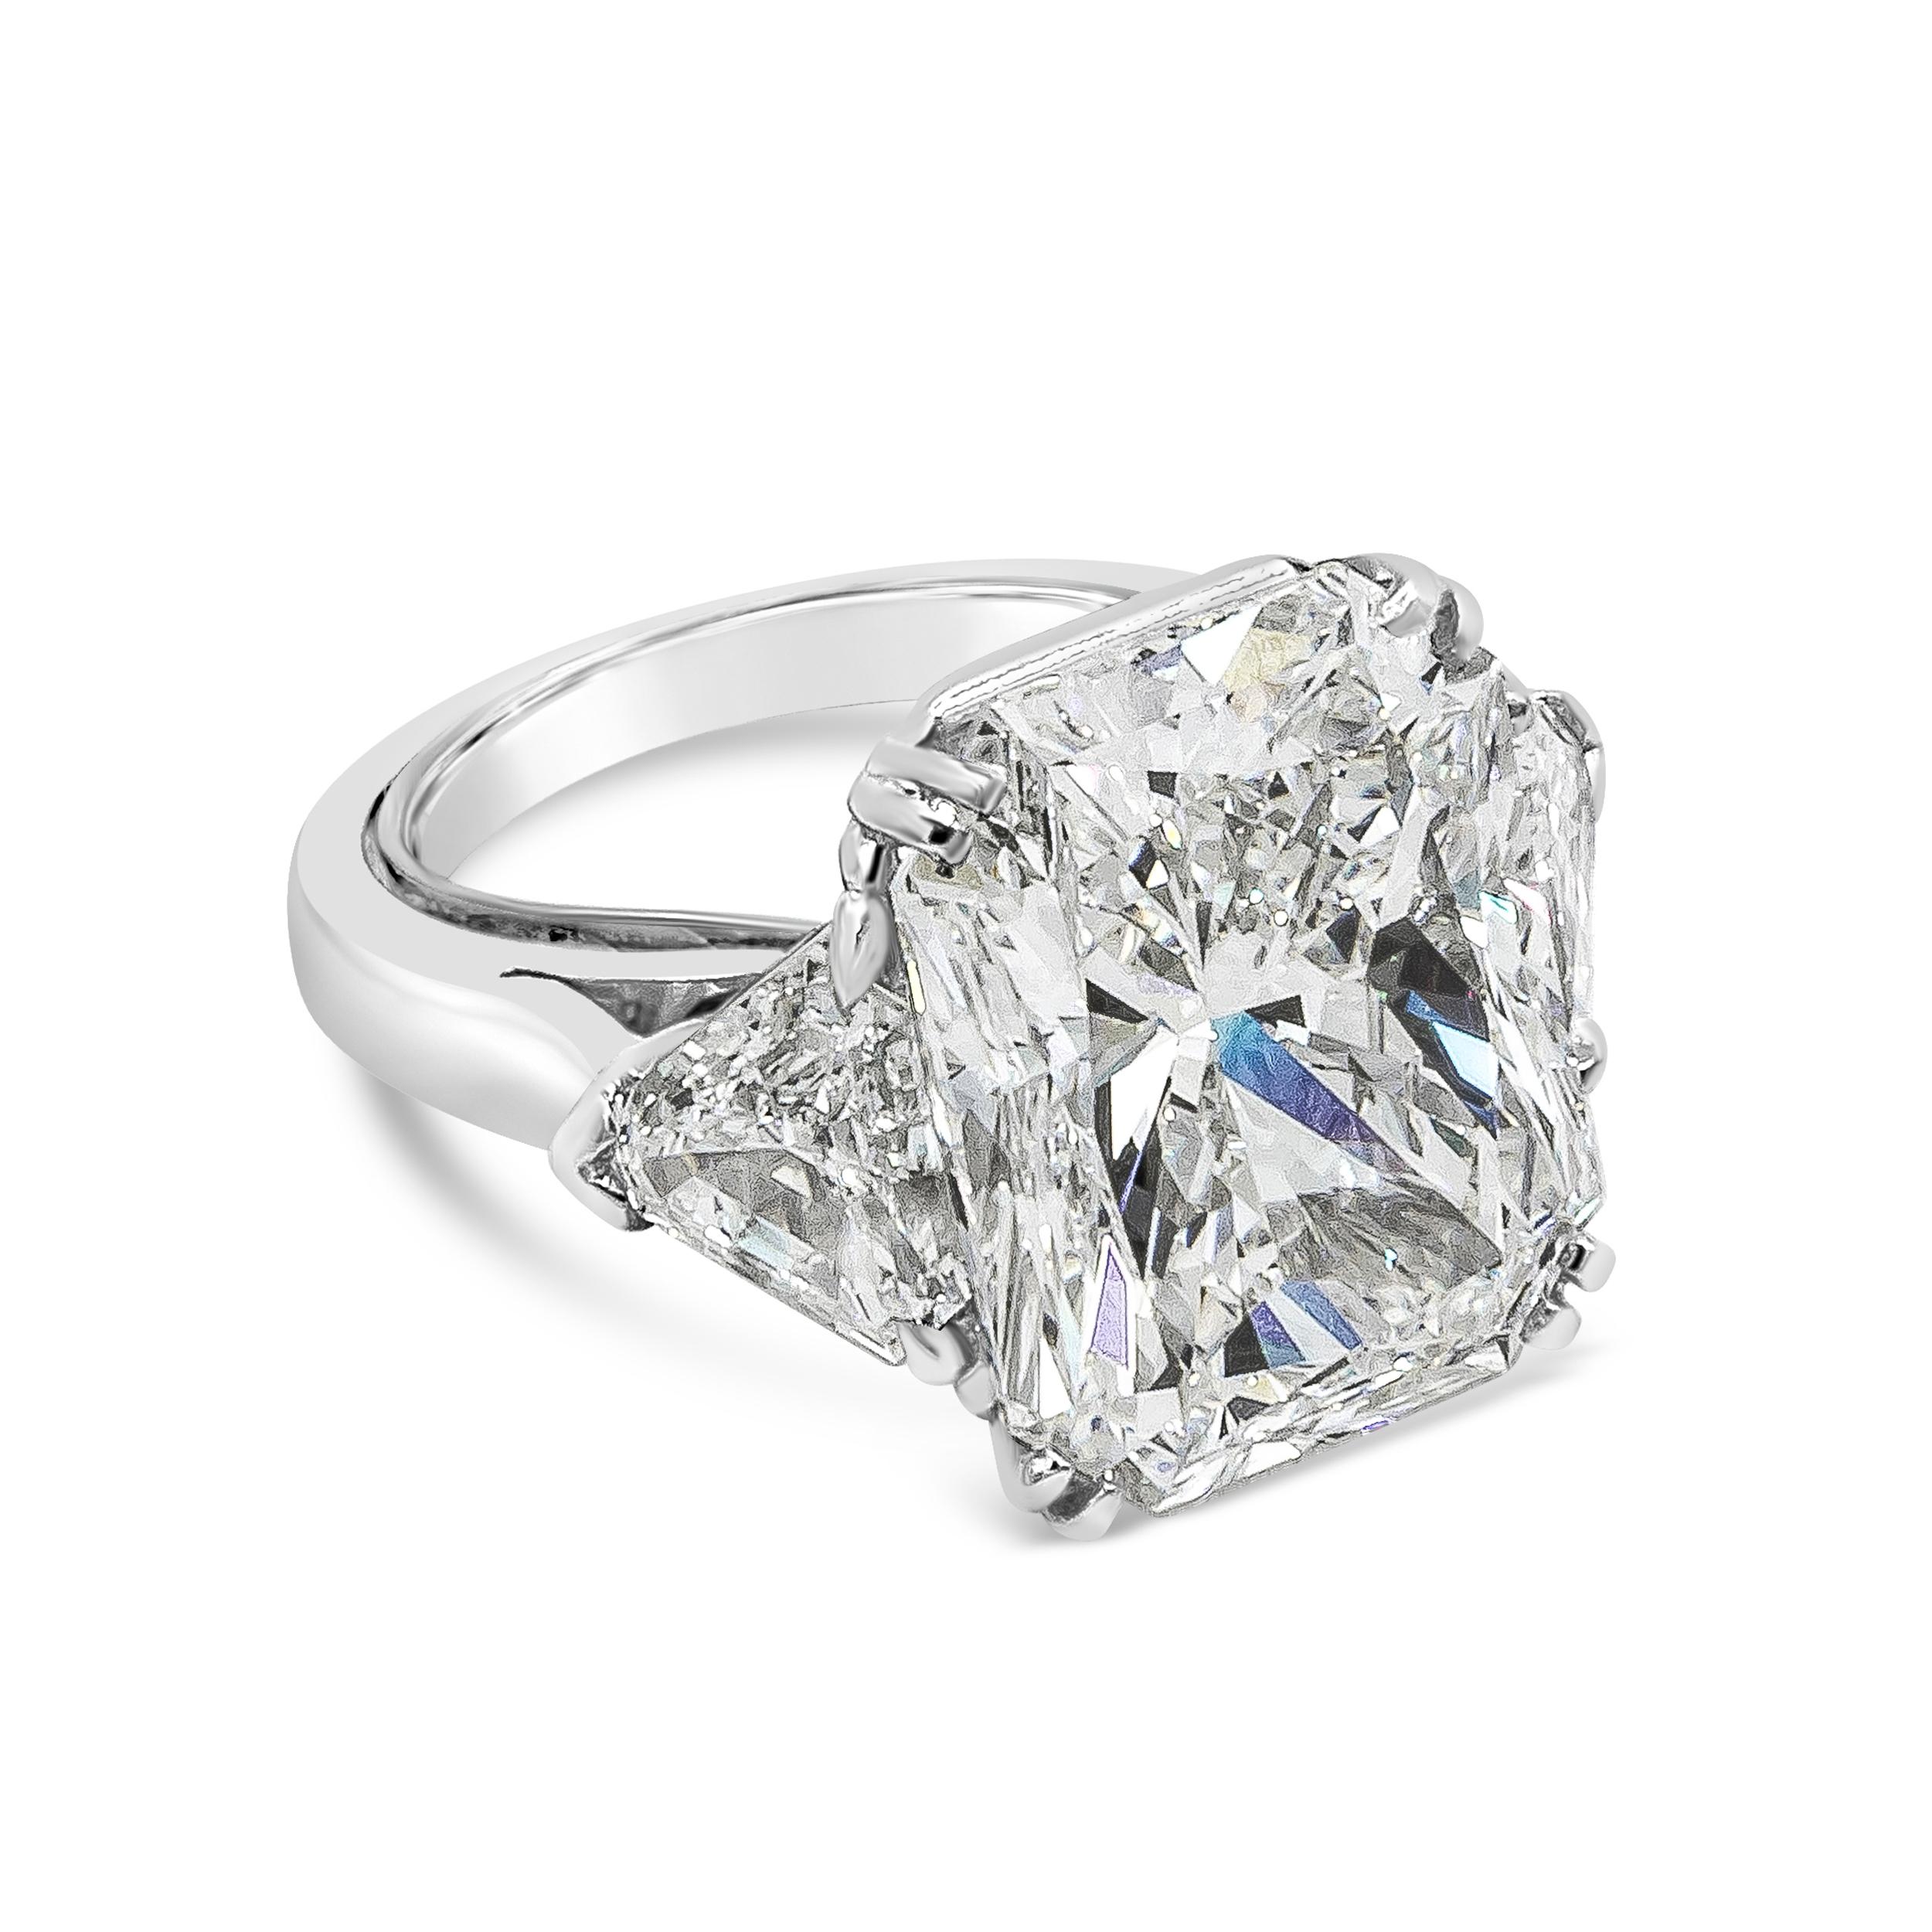 An exquisite and elegant three-stone engagement ring showcasing a GIA Certified 15.09 carat radiant cut diamond, H Color and VVS2 in Clarity. Flanked by two brilliant trillion diamonds weighing 1.95 carats total. Made with Platinum. Size 5.5